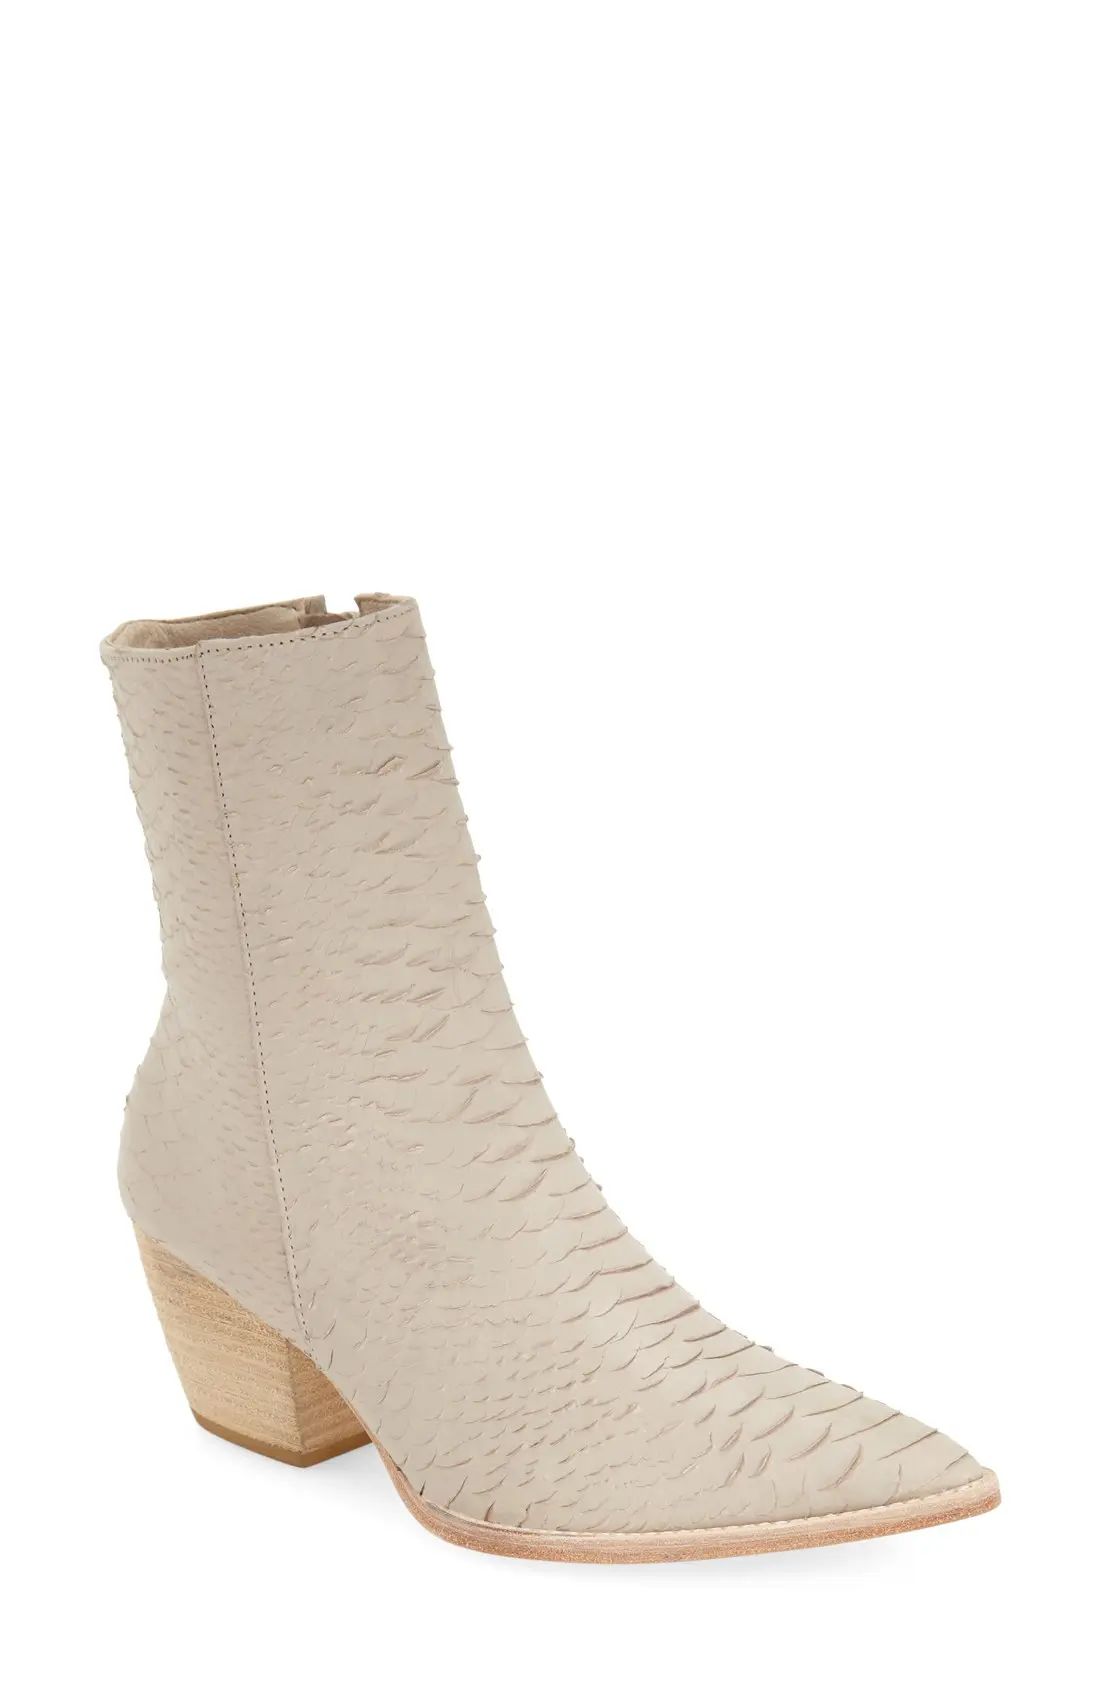 Matisse Caty Western Pointed Toe Bootie in Ivory Croc Embossed Leather at Nordstrom, Size 6.5 | Nordstrom